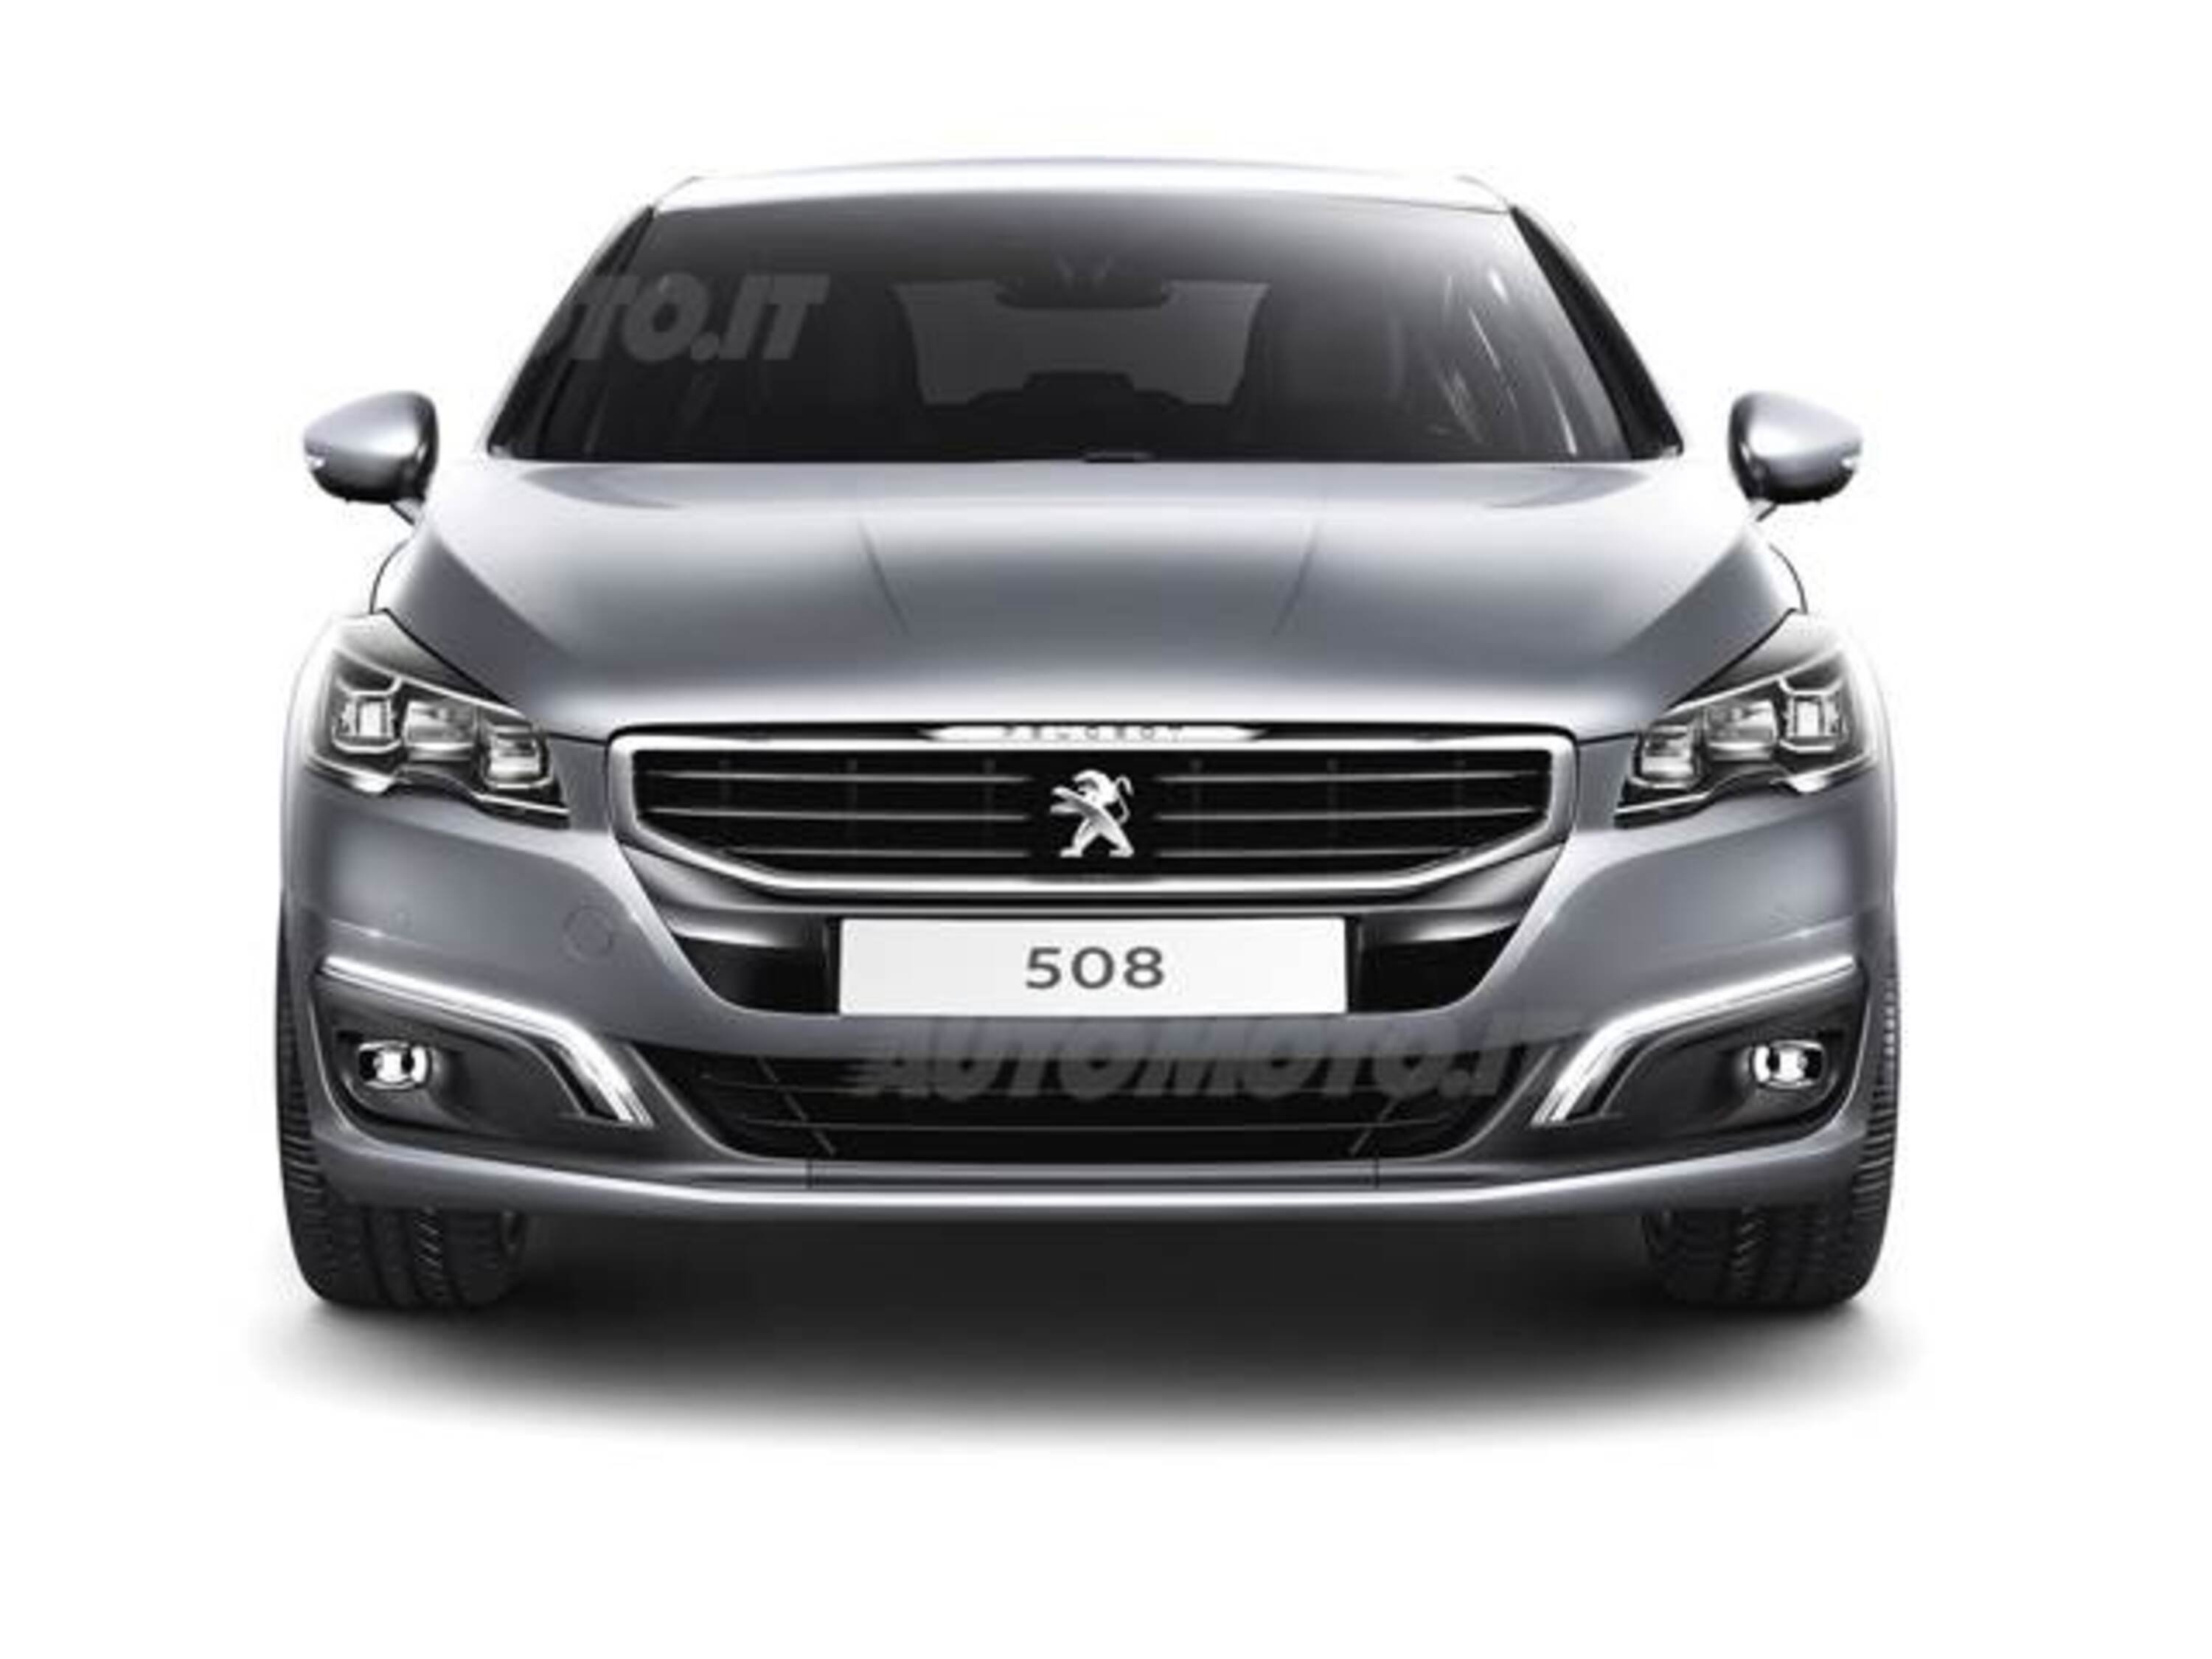 Peugeot 508 SW 2.0 HDi 140 CV Business my 14